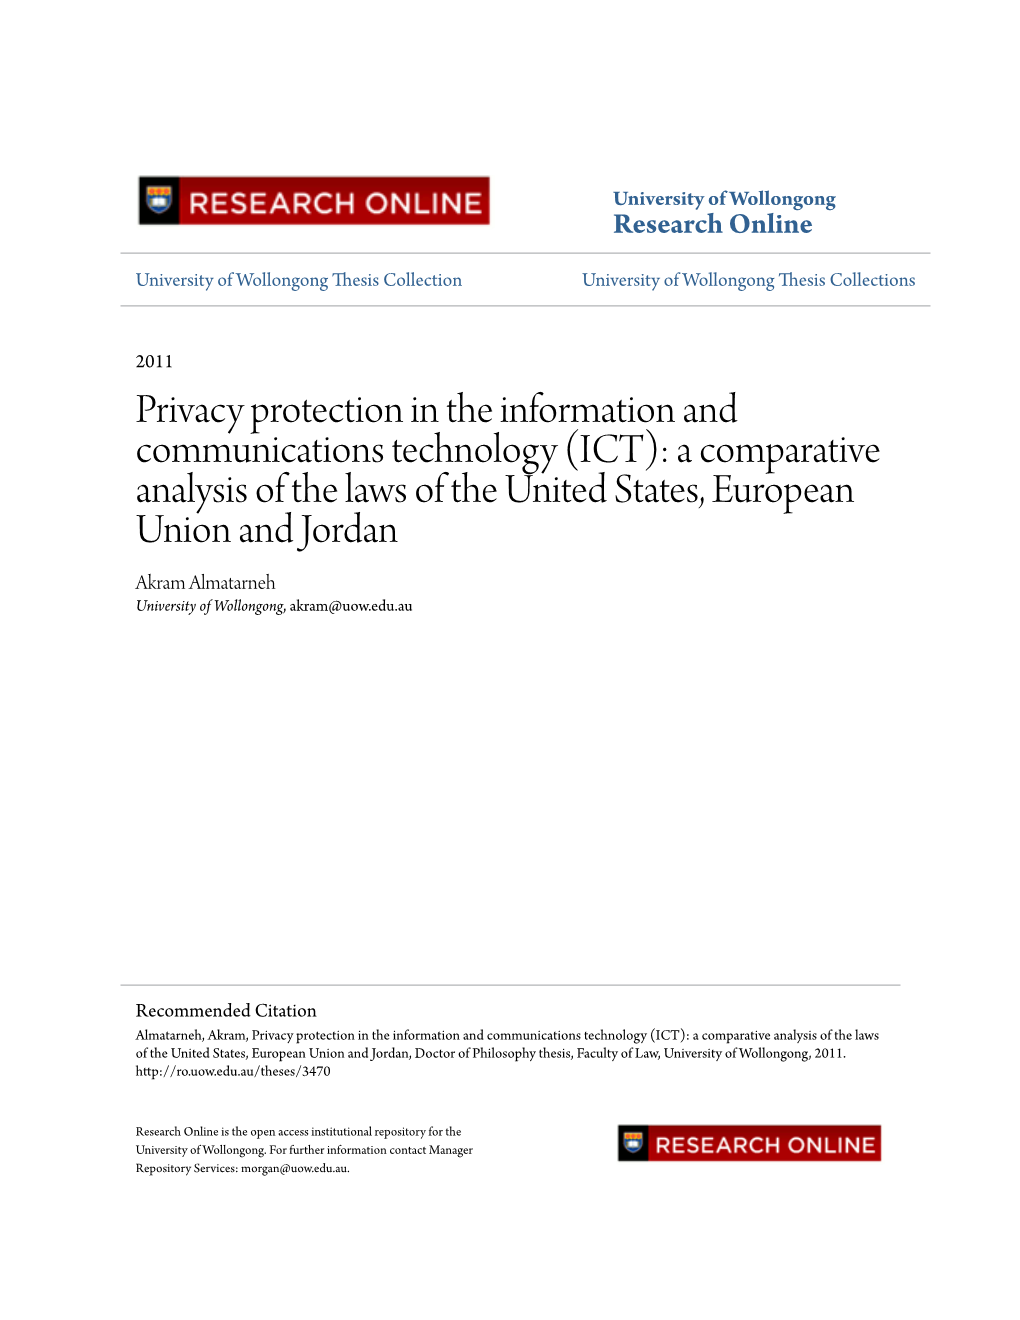 Privacy Protection in the Information and Communications Technology